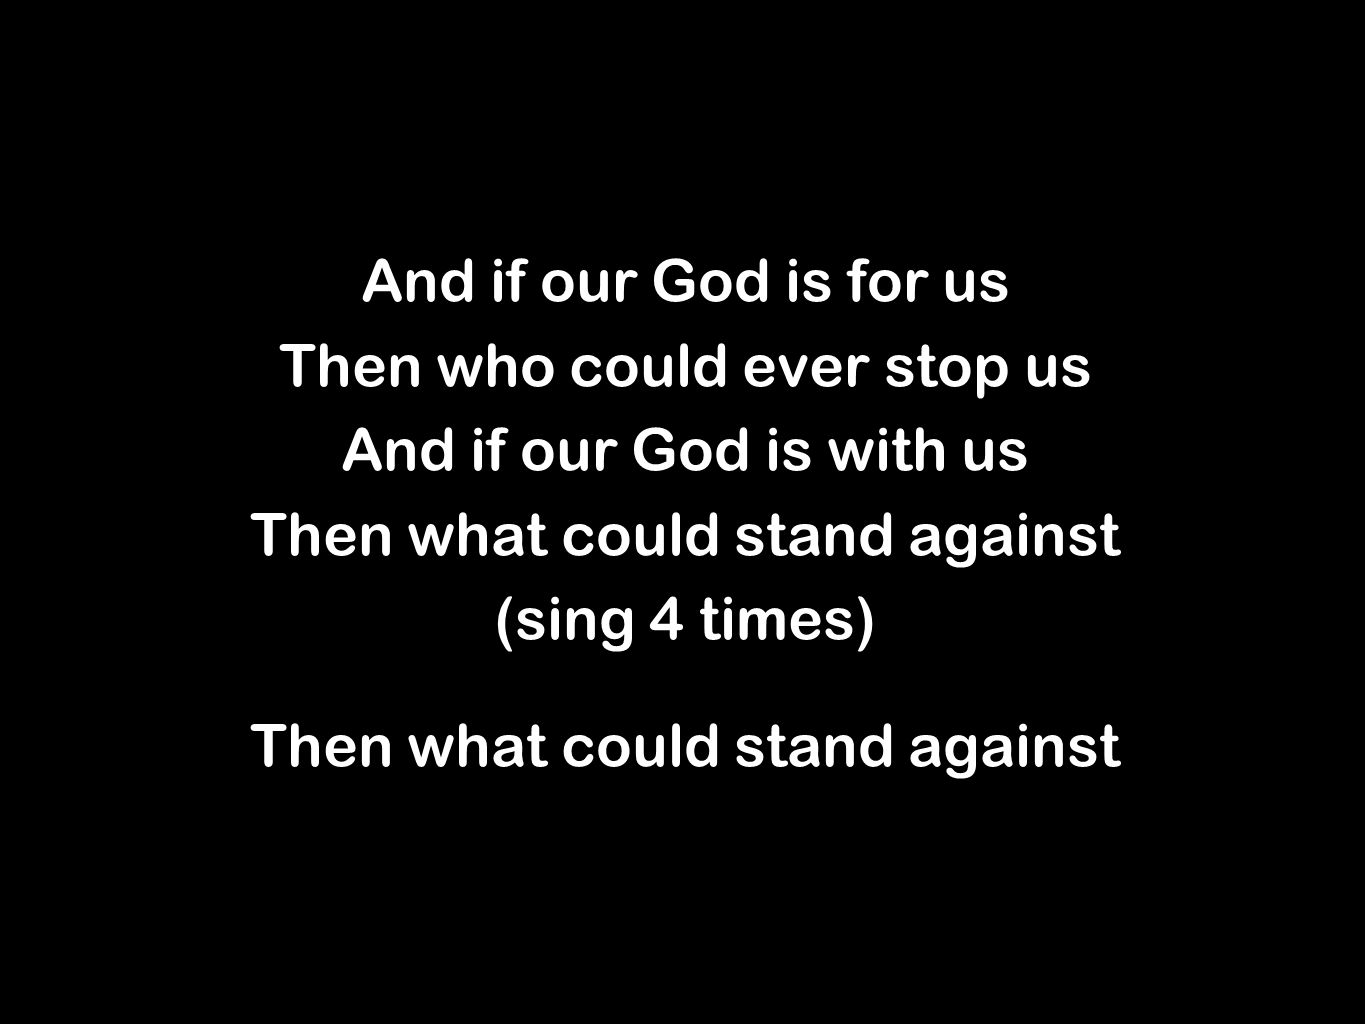 And if our God is for us Then who could ever stop us And if our God is with us Then what could stand against (sing 4 times) Then what could stand against And if our God is for us Then who could ever stop us And if our God is with us Then what could stand against (sing 4 times) Then what could stand against